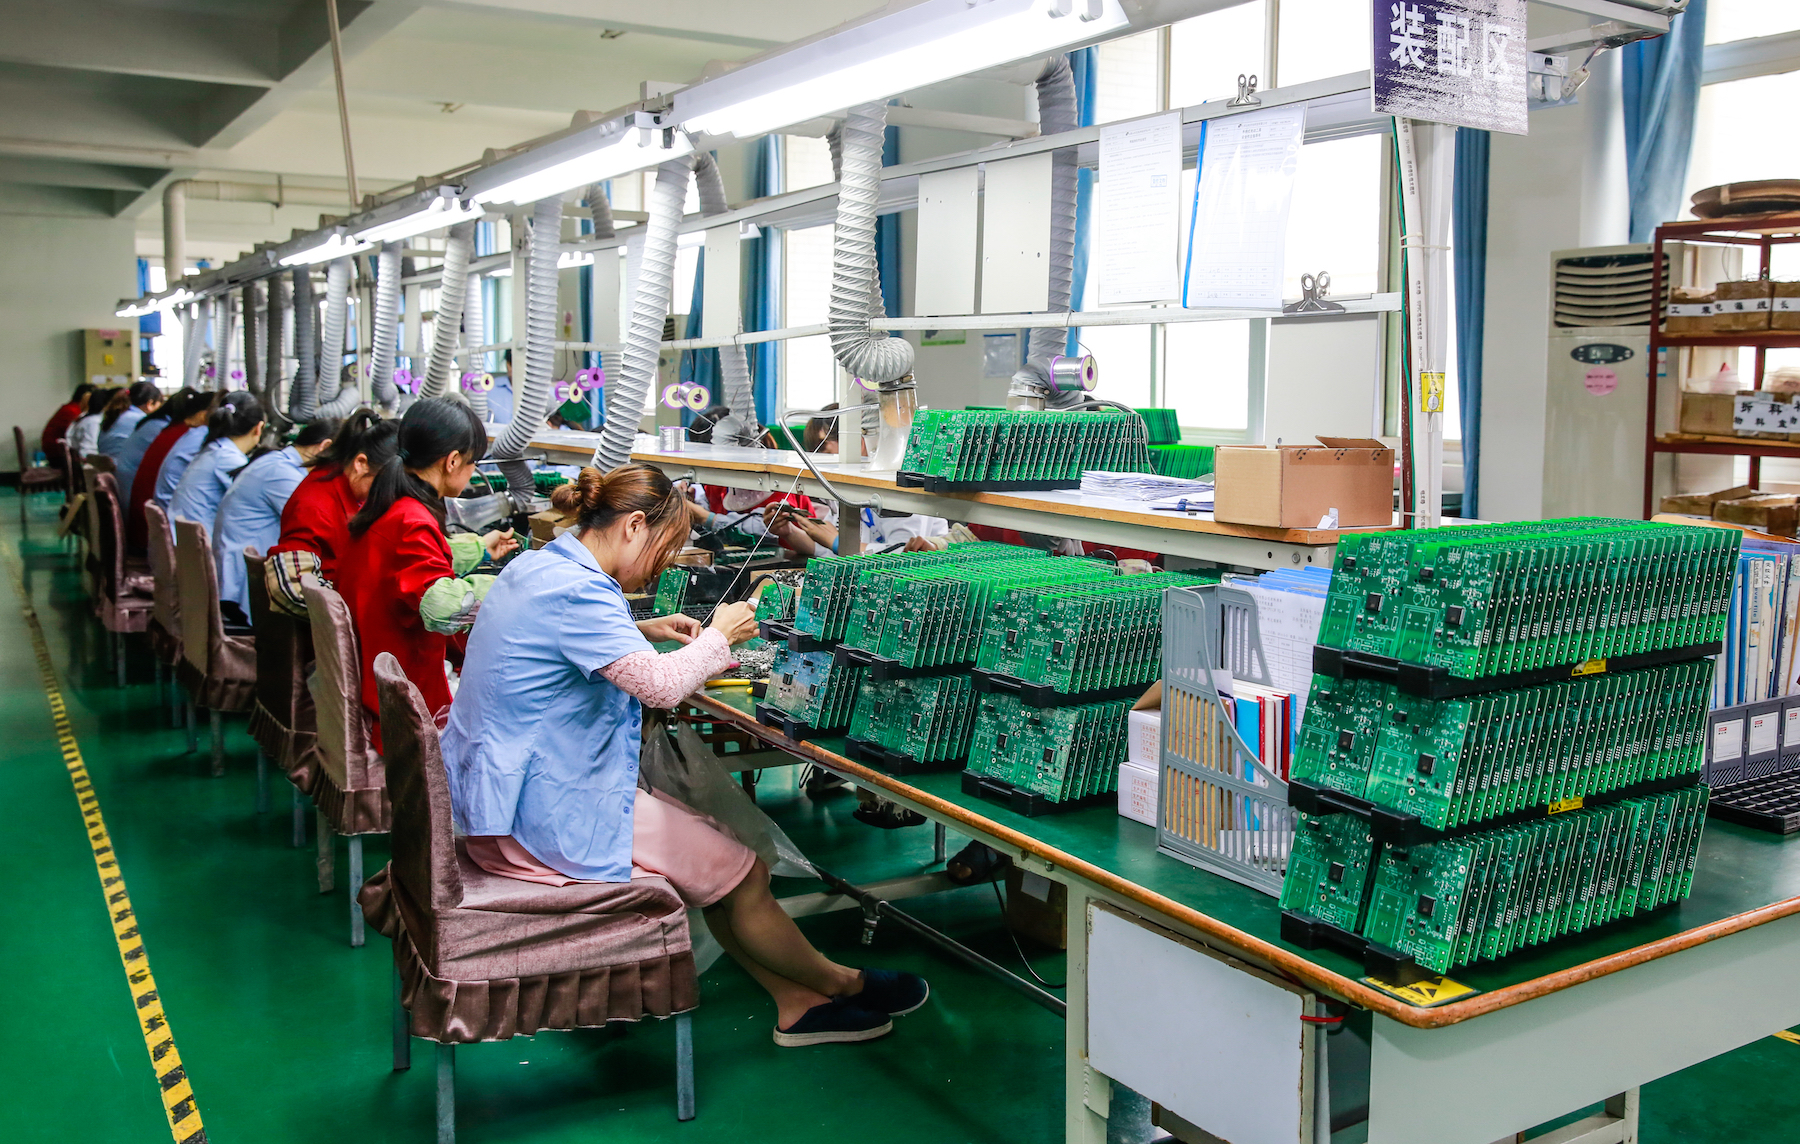 Workers in an electronics factory assemble circuit boards